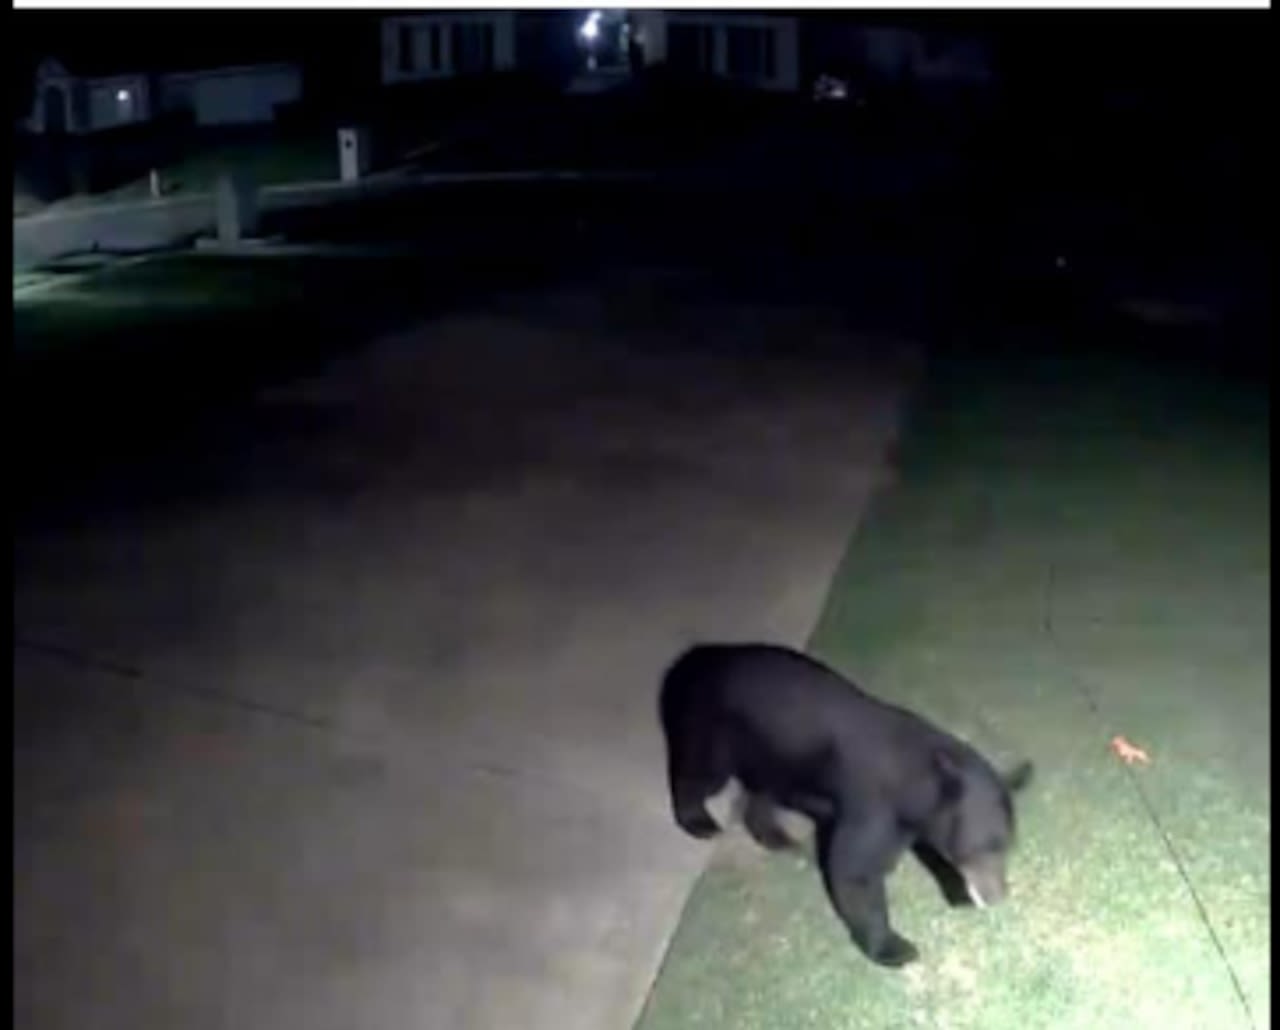 Black bear cub spotted in Tuscaloosa, city leader urges people to keep an eye on pets